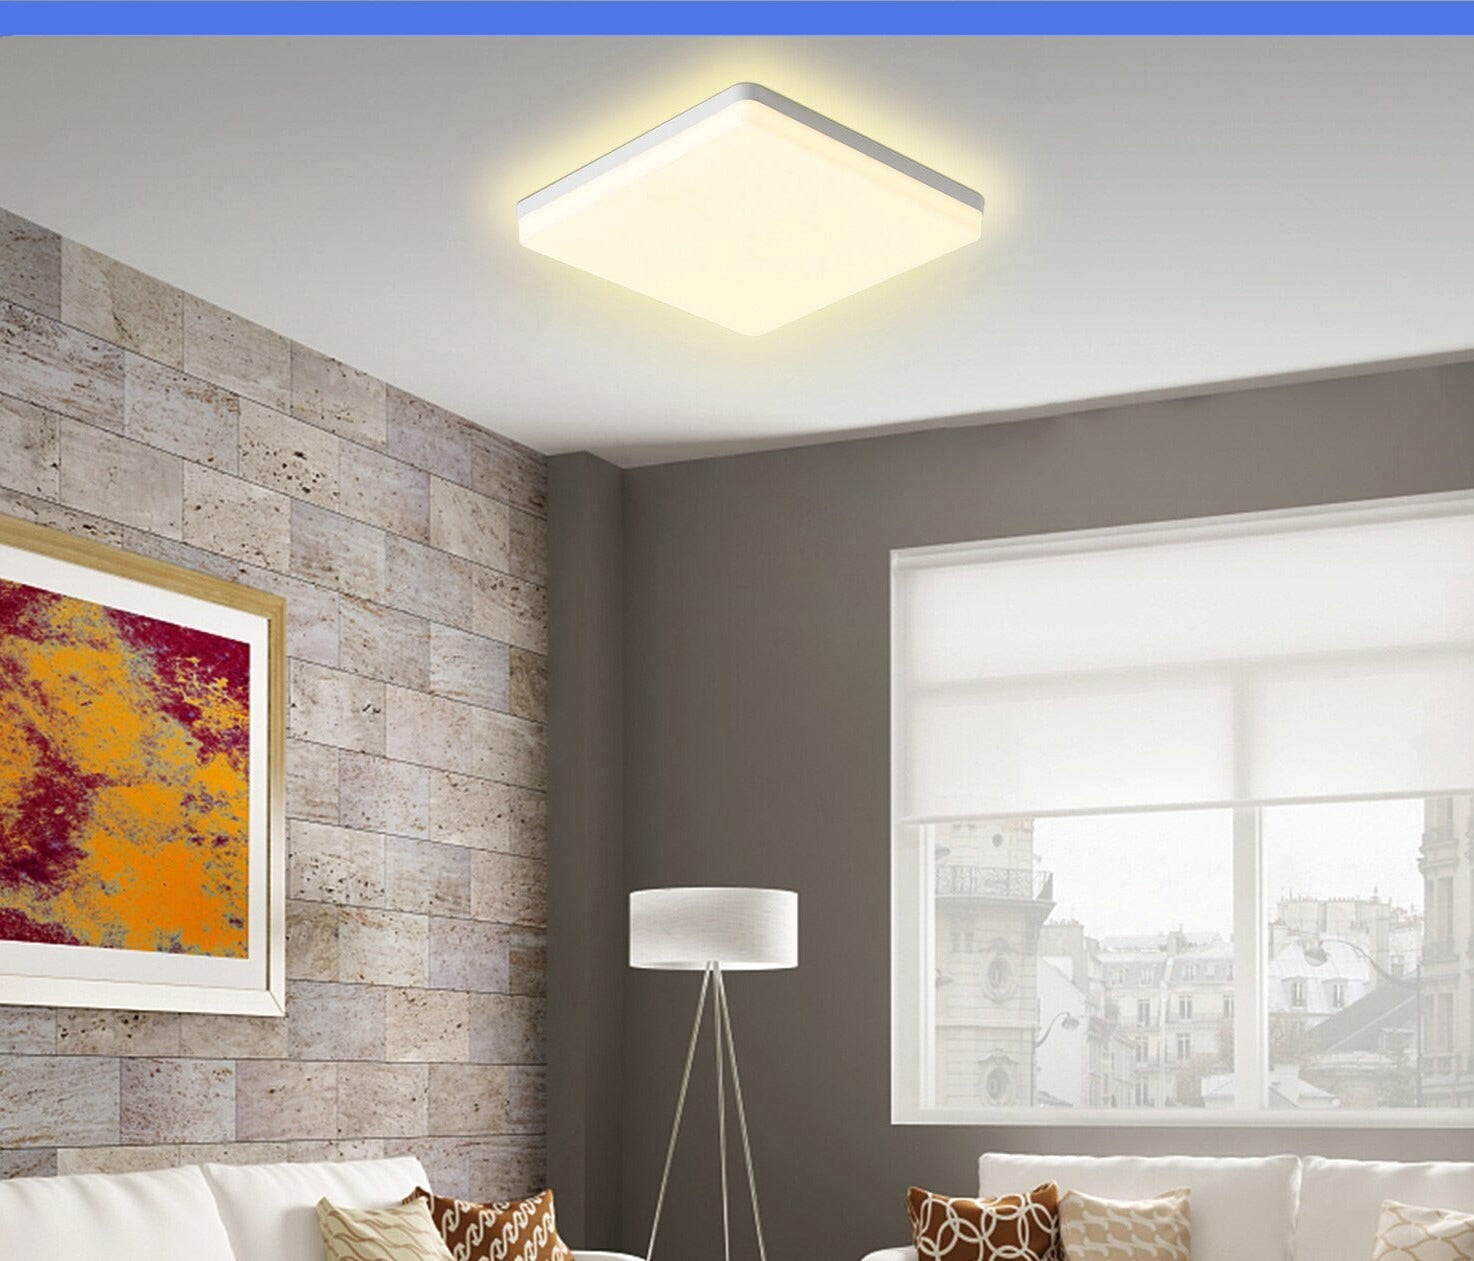 18/24/36/48W Square Ceiling Lamp LEDs Ceiling Light Flush Mounting Convenient Super Bright Ceiling Lamp Kitchen Bedroom Hallway